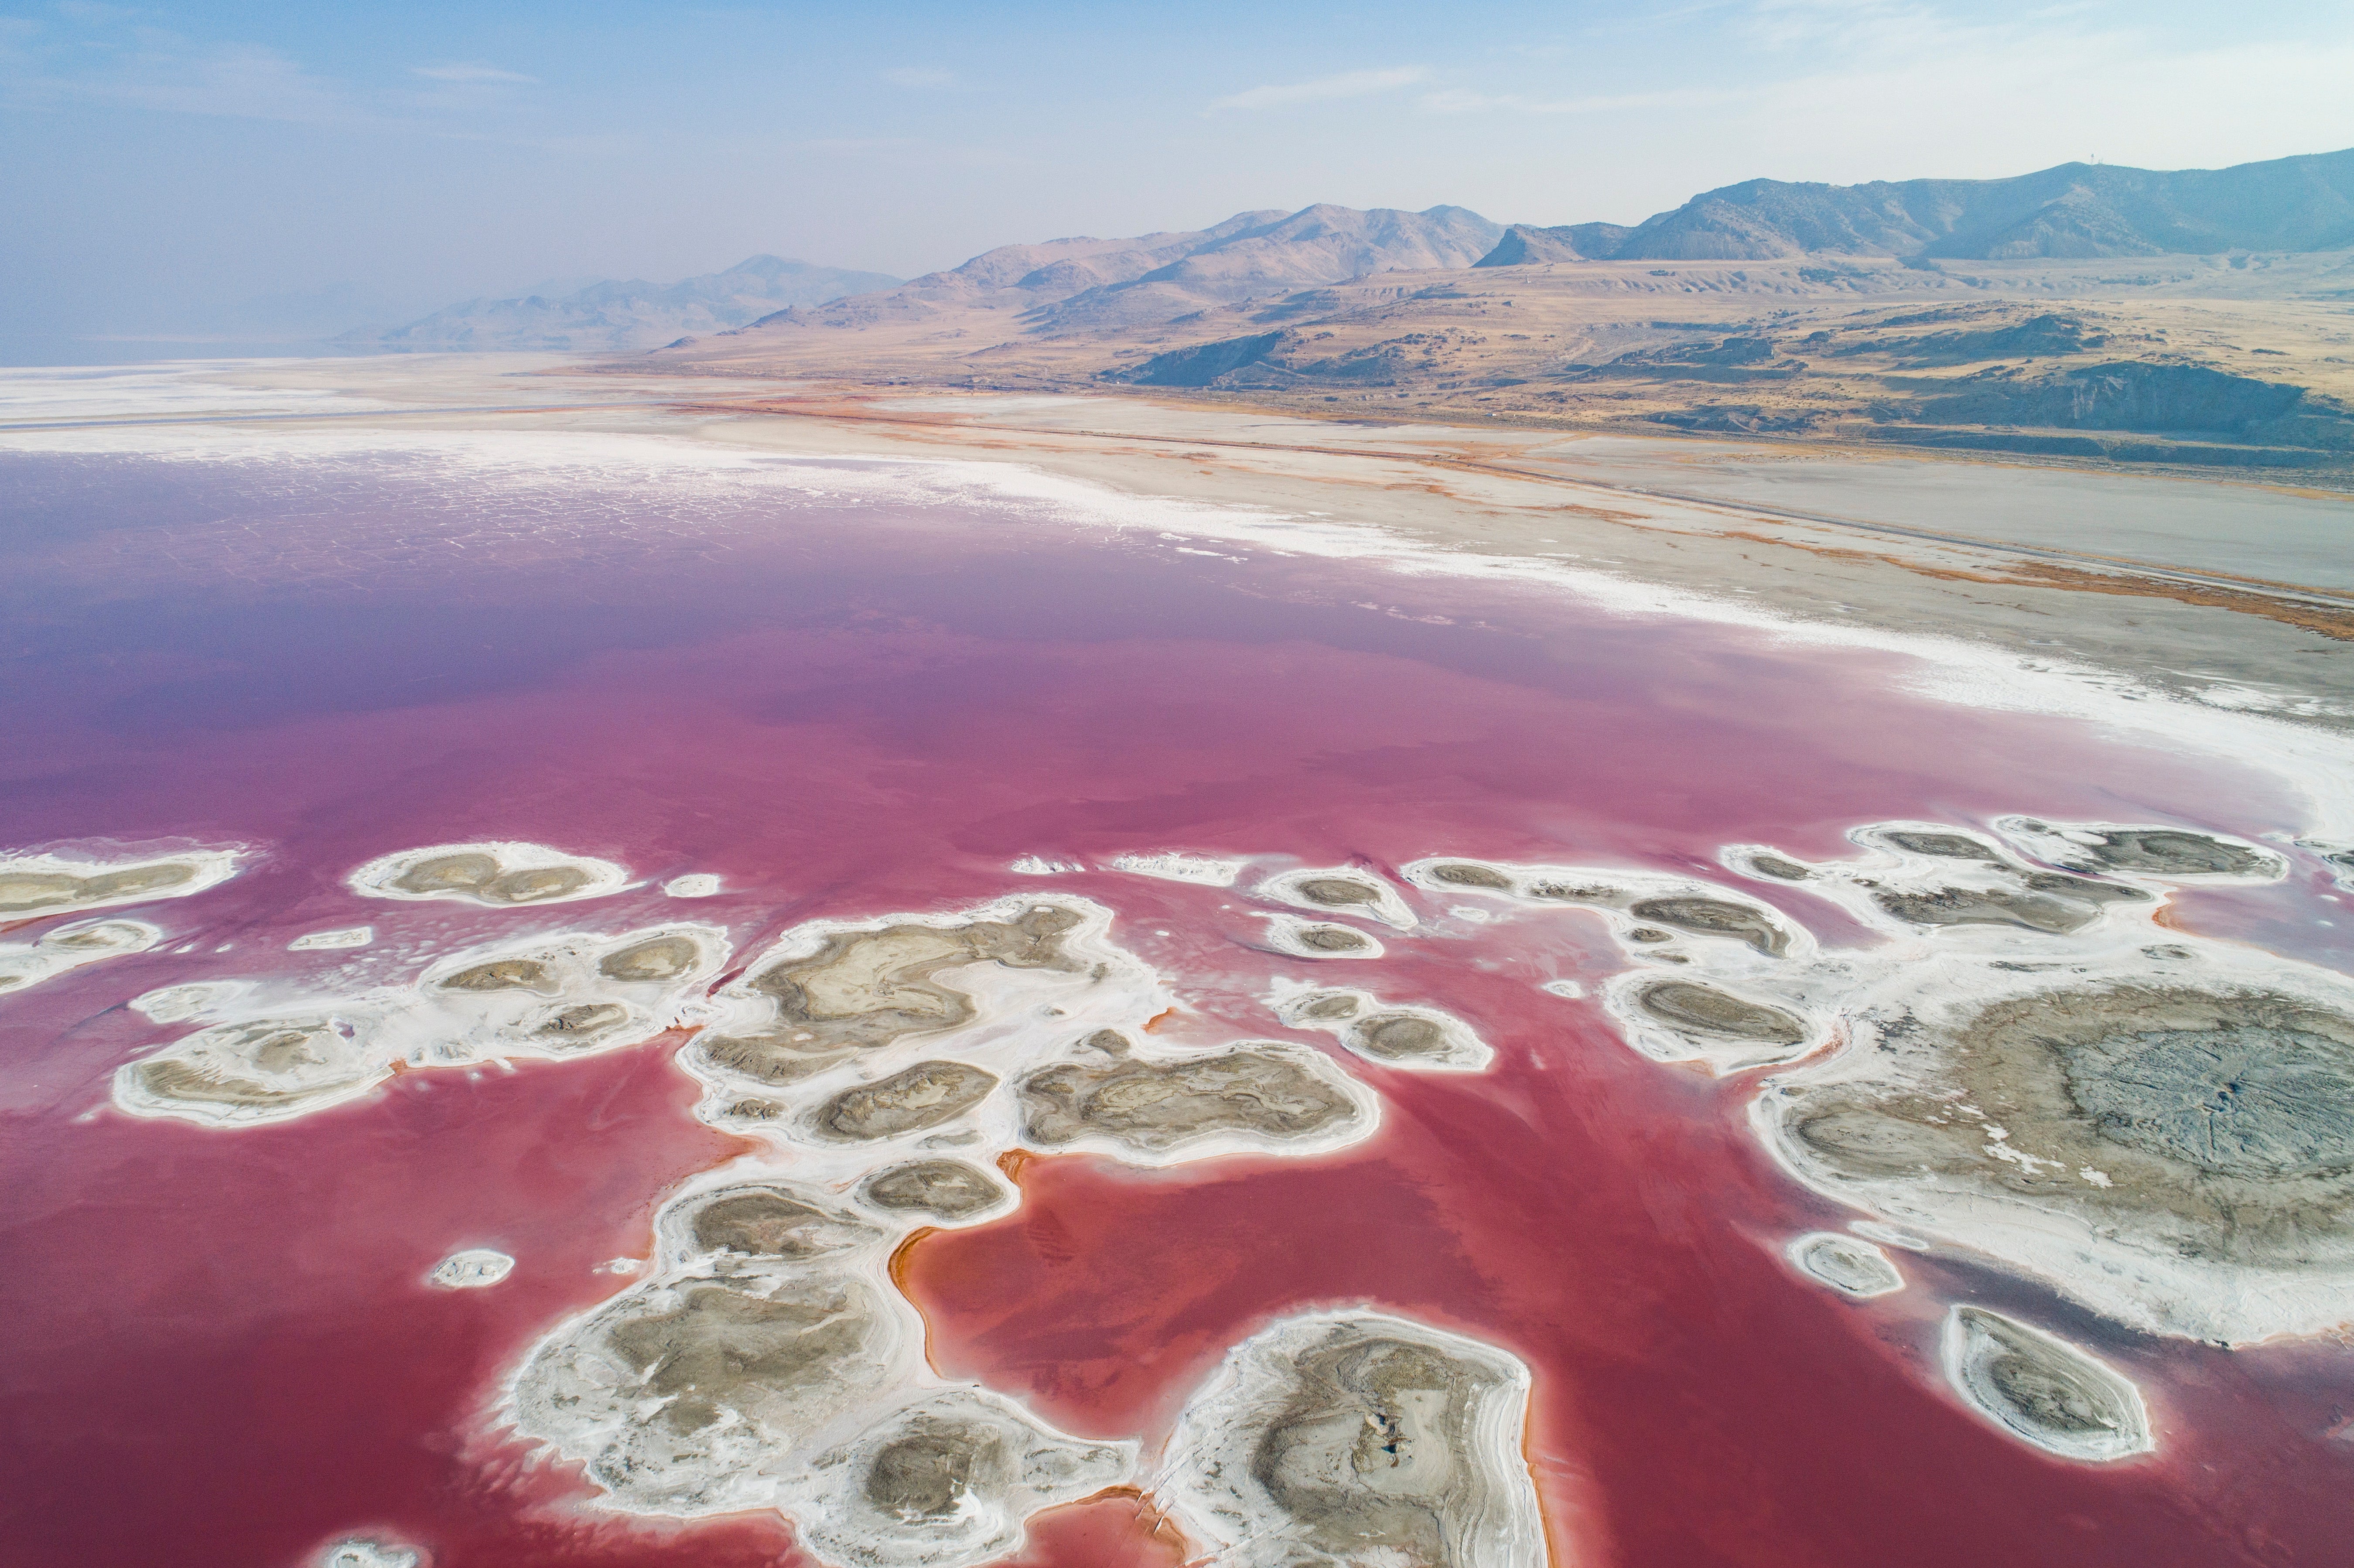 Varying levels of salinity cause different colours, with an algae that flourishes in higher salt content causing the red pigment